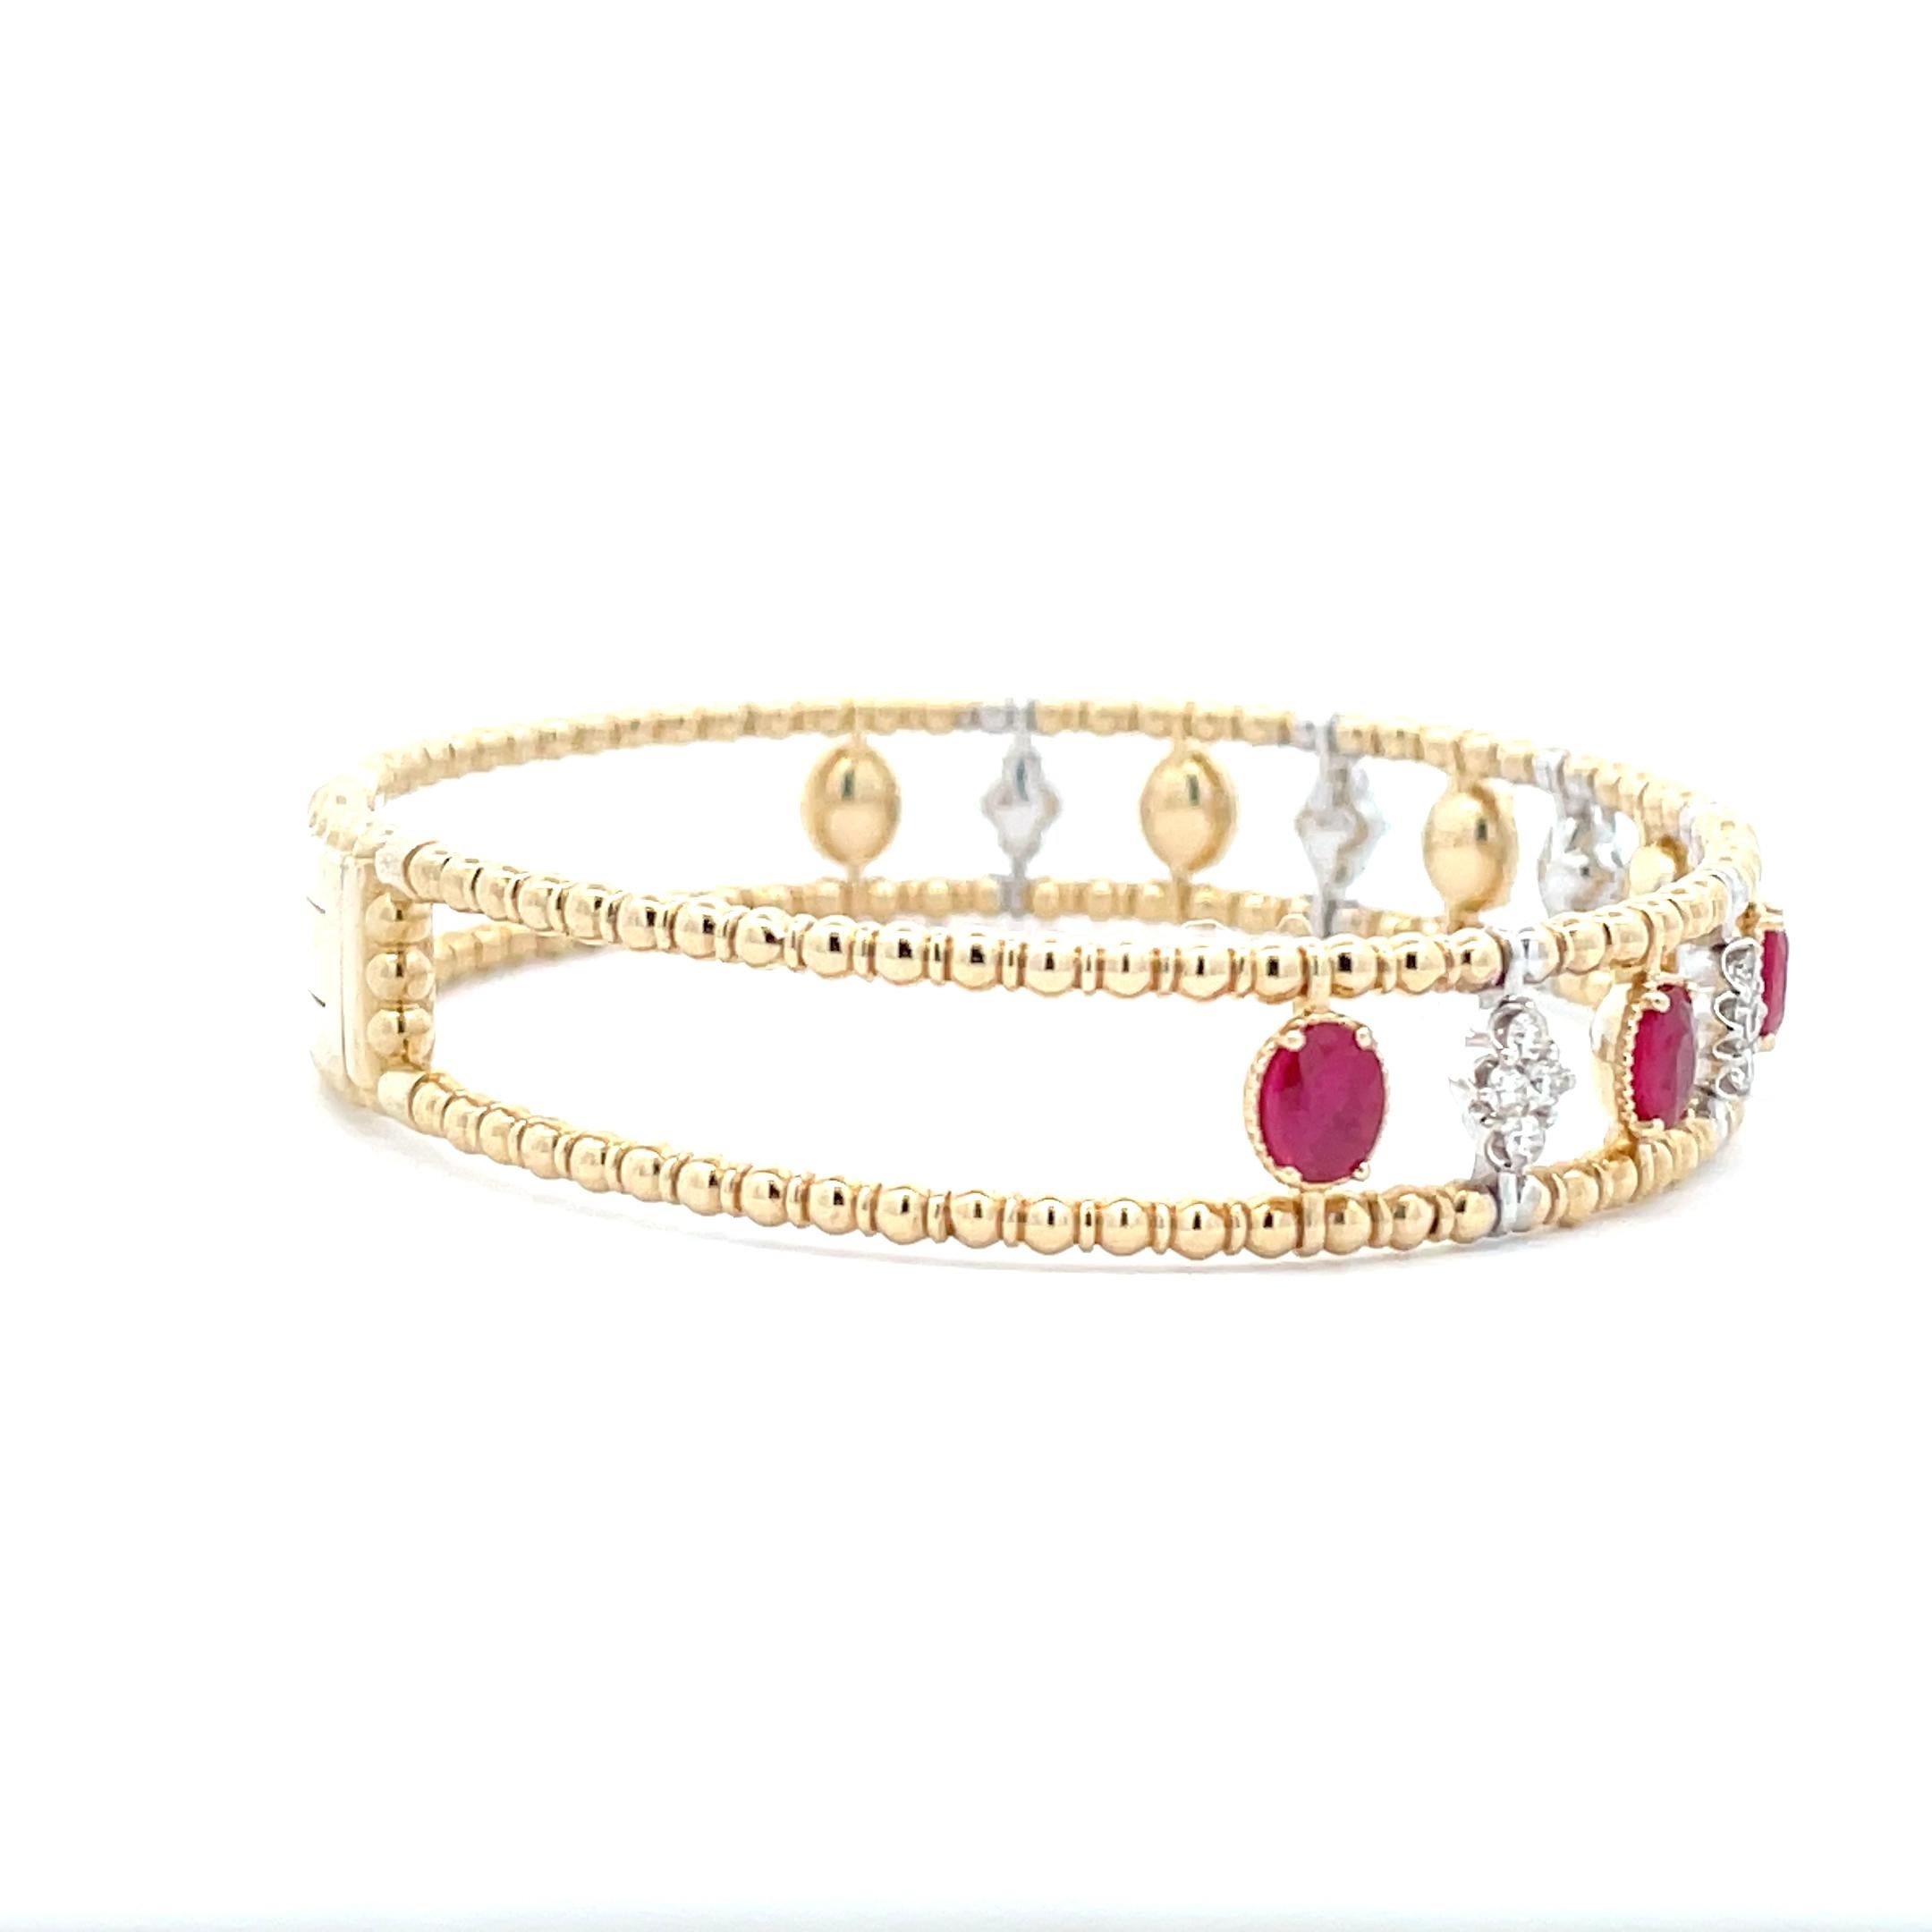 The ultimate celebration of life, our 2.28 ct. Ruby and Diamond Gold Bead Cage Bangle is the perfect gift for any occasion. Crafted by a professional artisan, this bold bangle was designed with premium metals and sparkling cut stones that capture